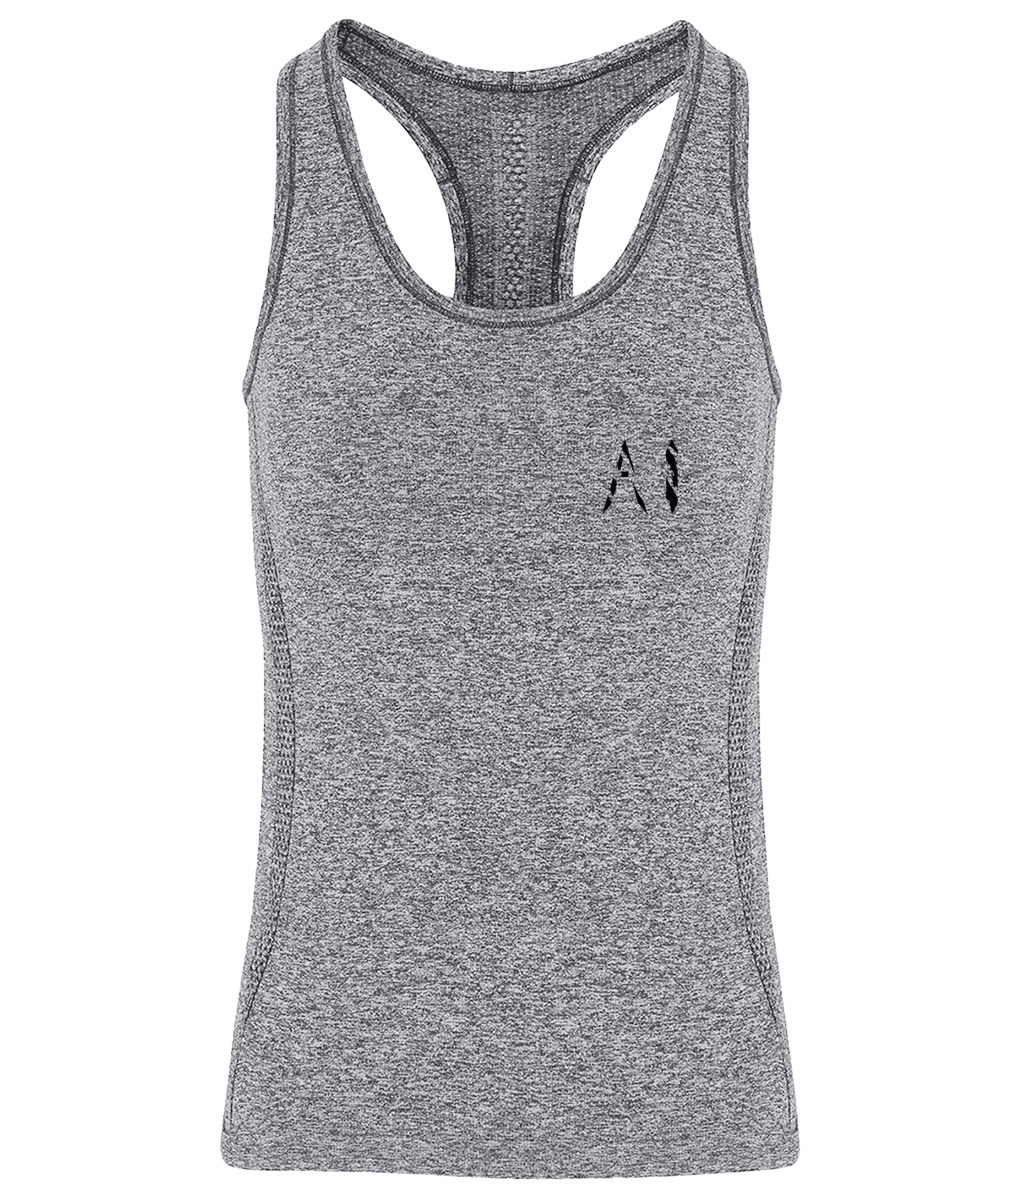 Womens grey Athletic Seamless Sports Vest with Black AI logo on left breast